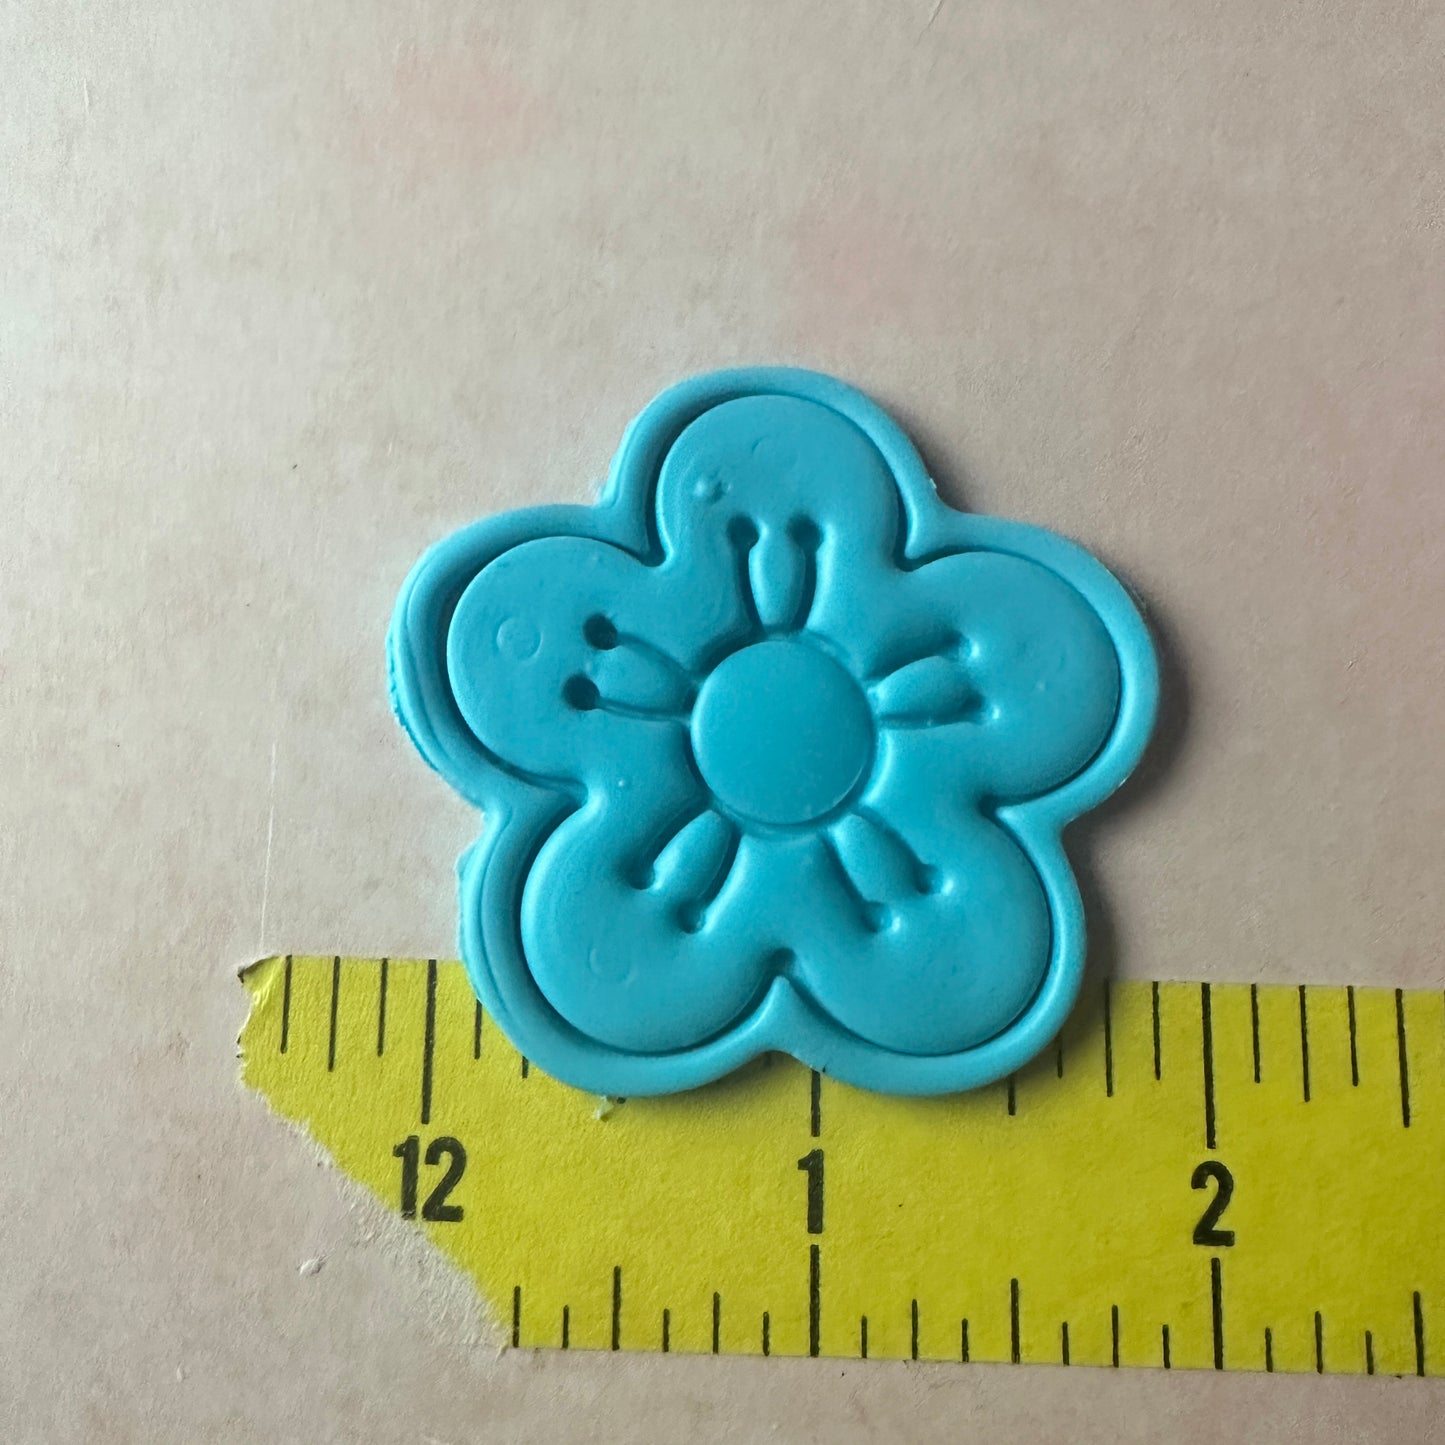 Flower Power Plum blossom stamp and clay cutter set